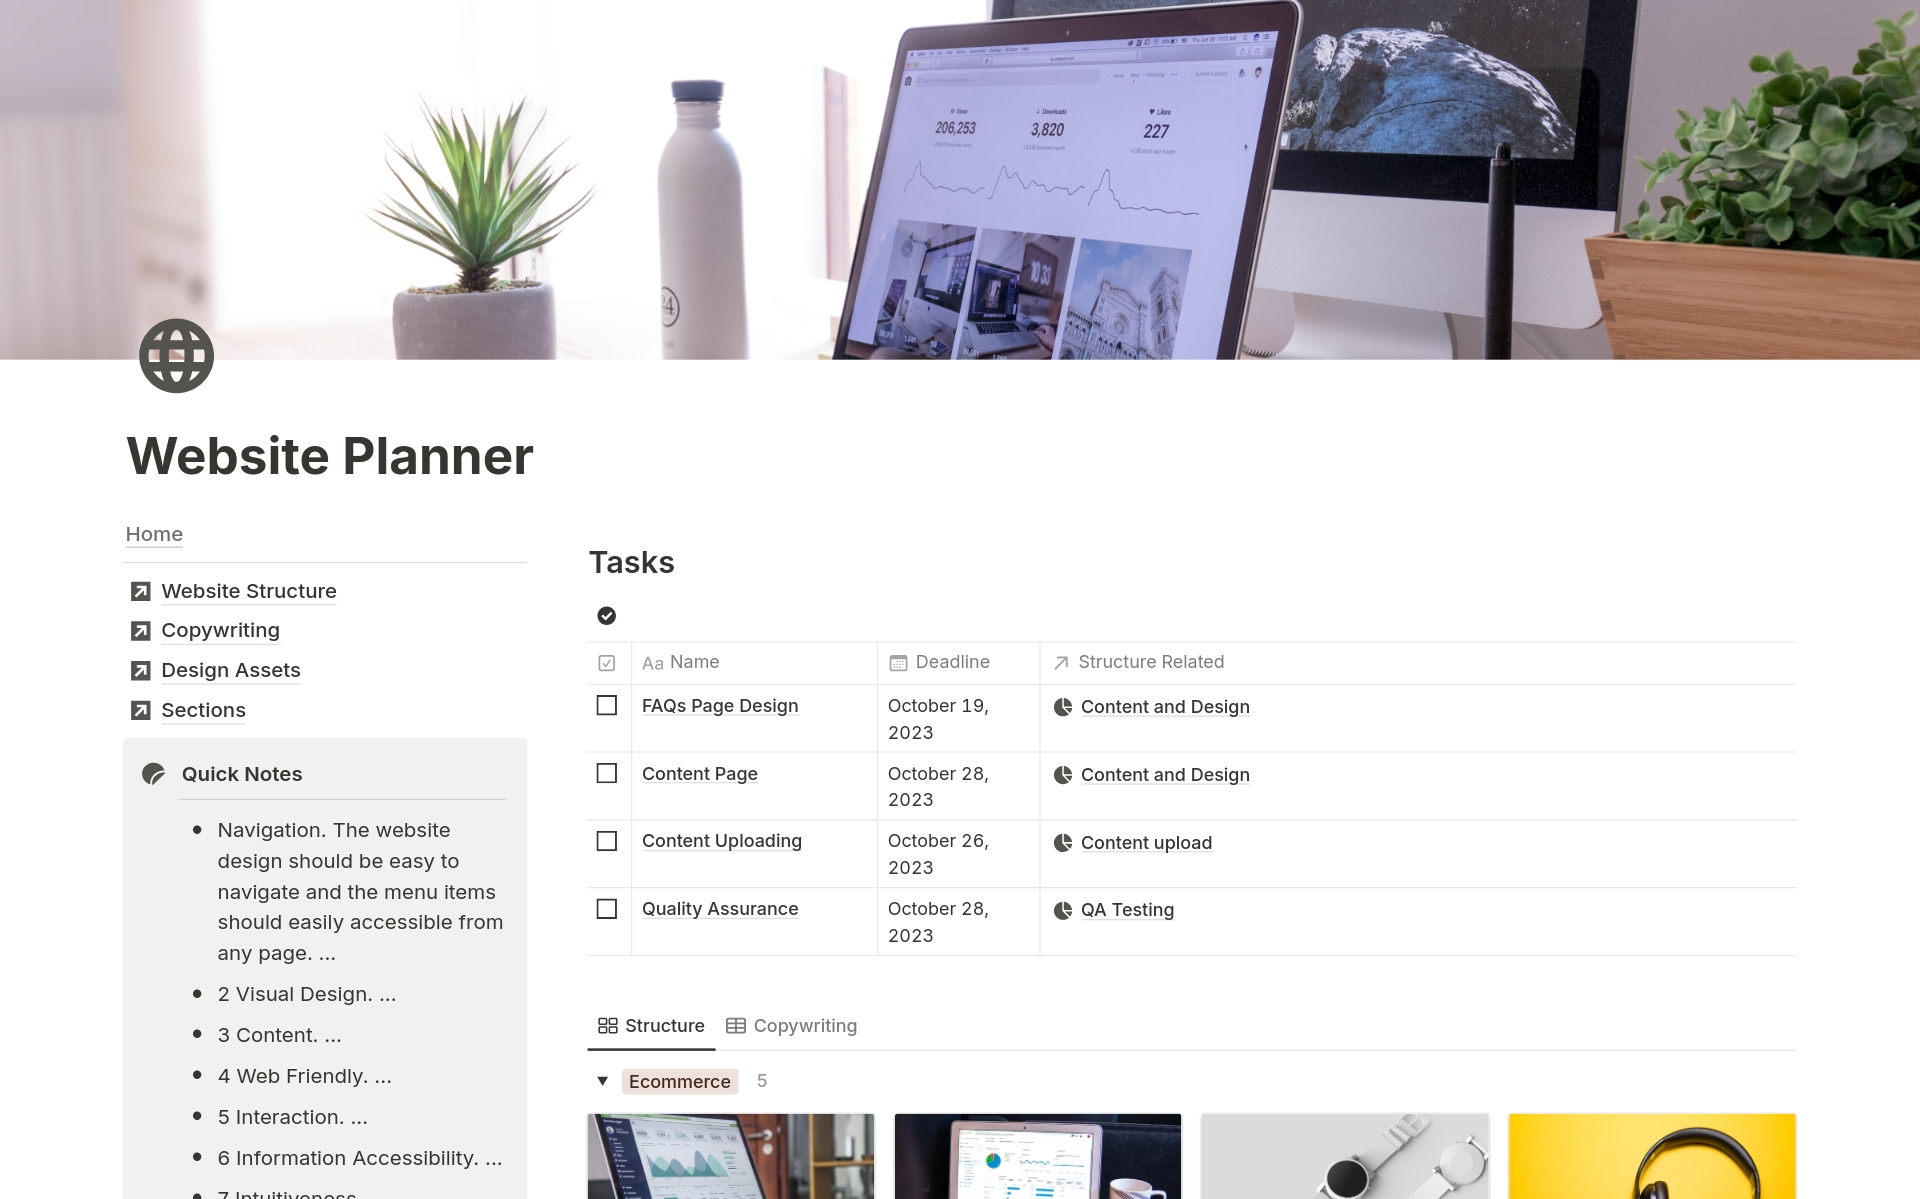 Streamline Your Website Planning, Messaging, and Design with the Tried, Tested, and Proven Website Planner Notion Template Solution.